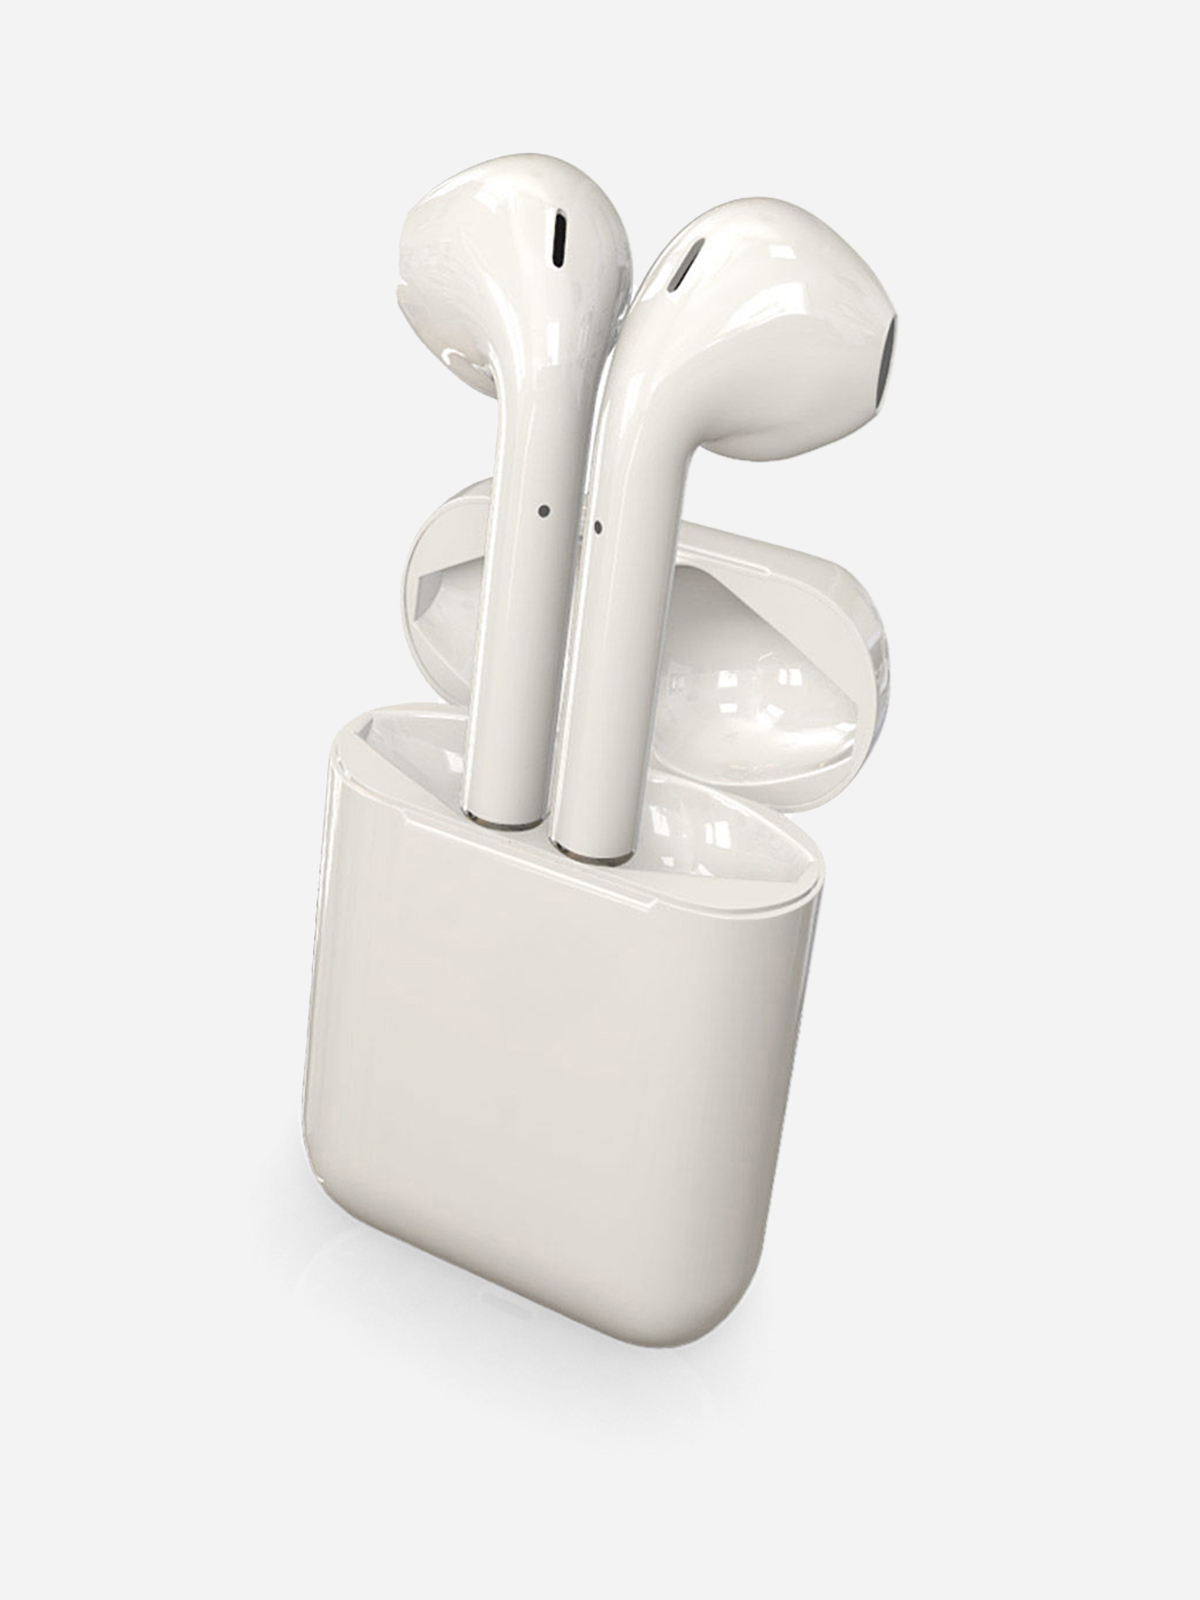 Urban Style - White Plastic Wireless Earpods with Charging Case